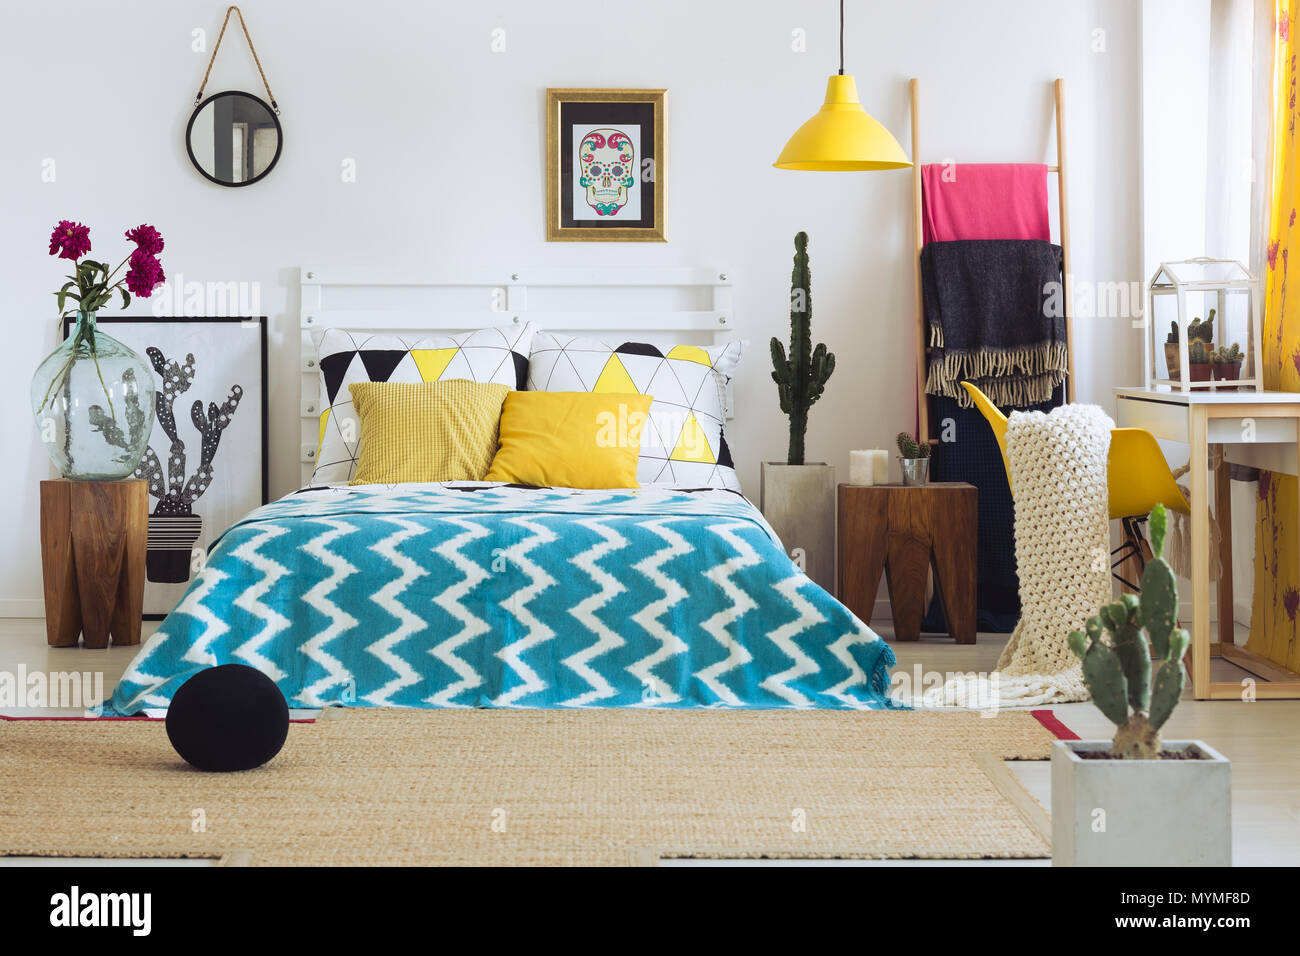 Trendy geometric decor in bright colorful bedroom with vivid colors Stock Photo